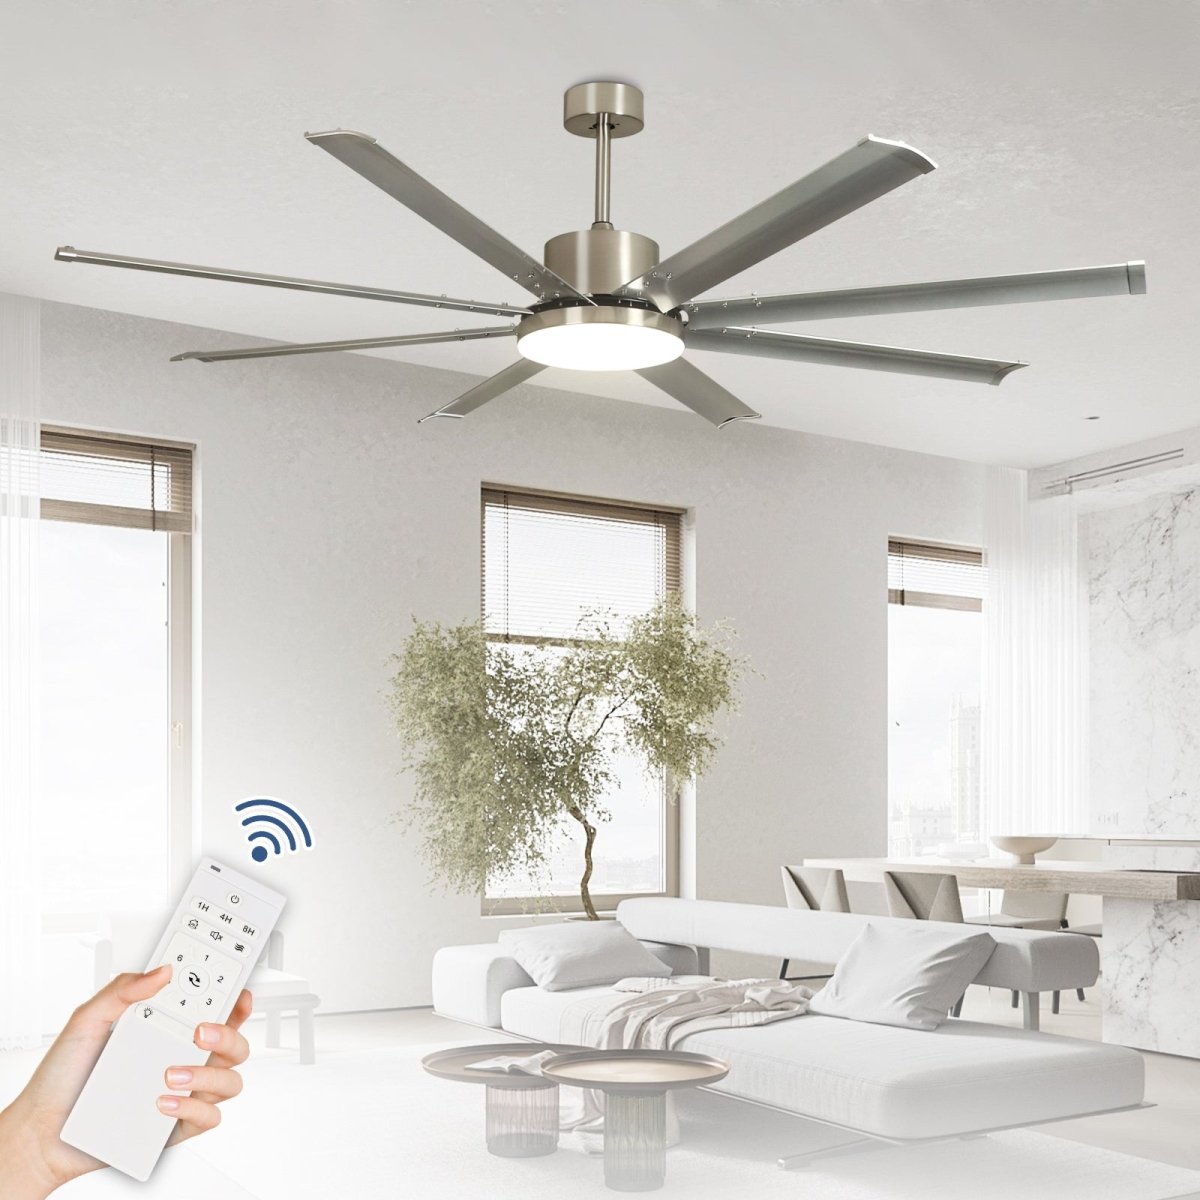 Depuley 72" Large Ceiling Fans with Light and remote, Modern Nickel Reversible Ceiling Fan with Light LED and 8 Aluminum Blades, Outdoor DC Ceiling Fans with 6-Speed for Covered Patios, 3CCT, Timer - WS-FPZ57-24C-8-NS 1 | DEPULEY